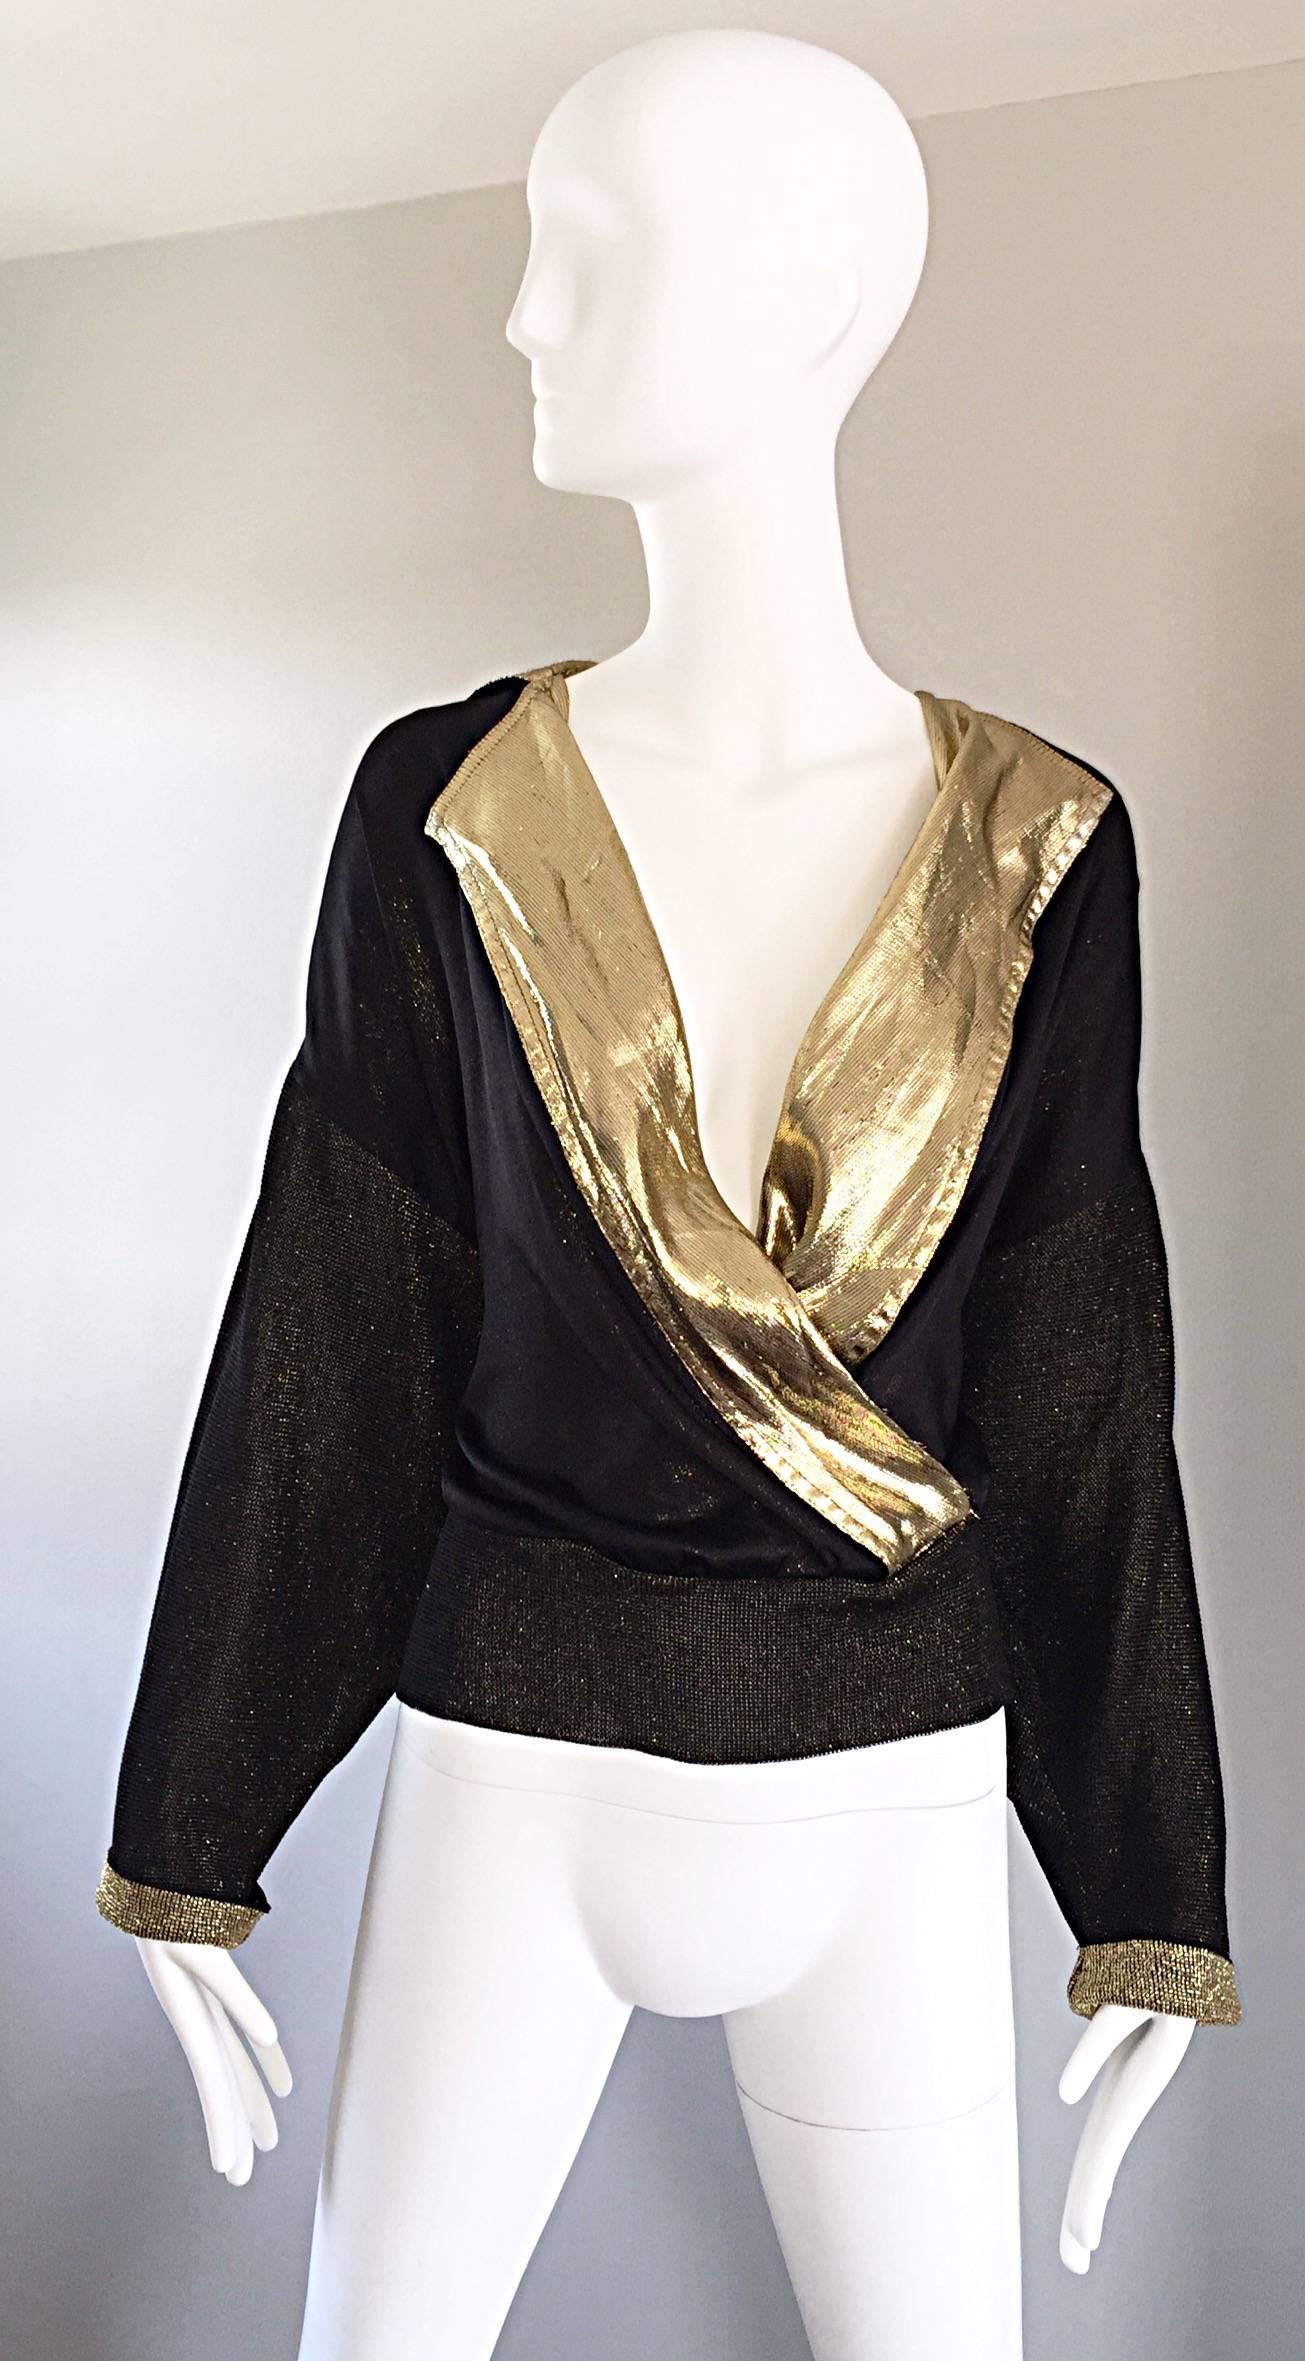 Women's Gianfranco Ferre Vintage Black and Gold Silk Lame Knit Plunging Blouse Top